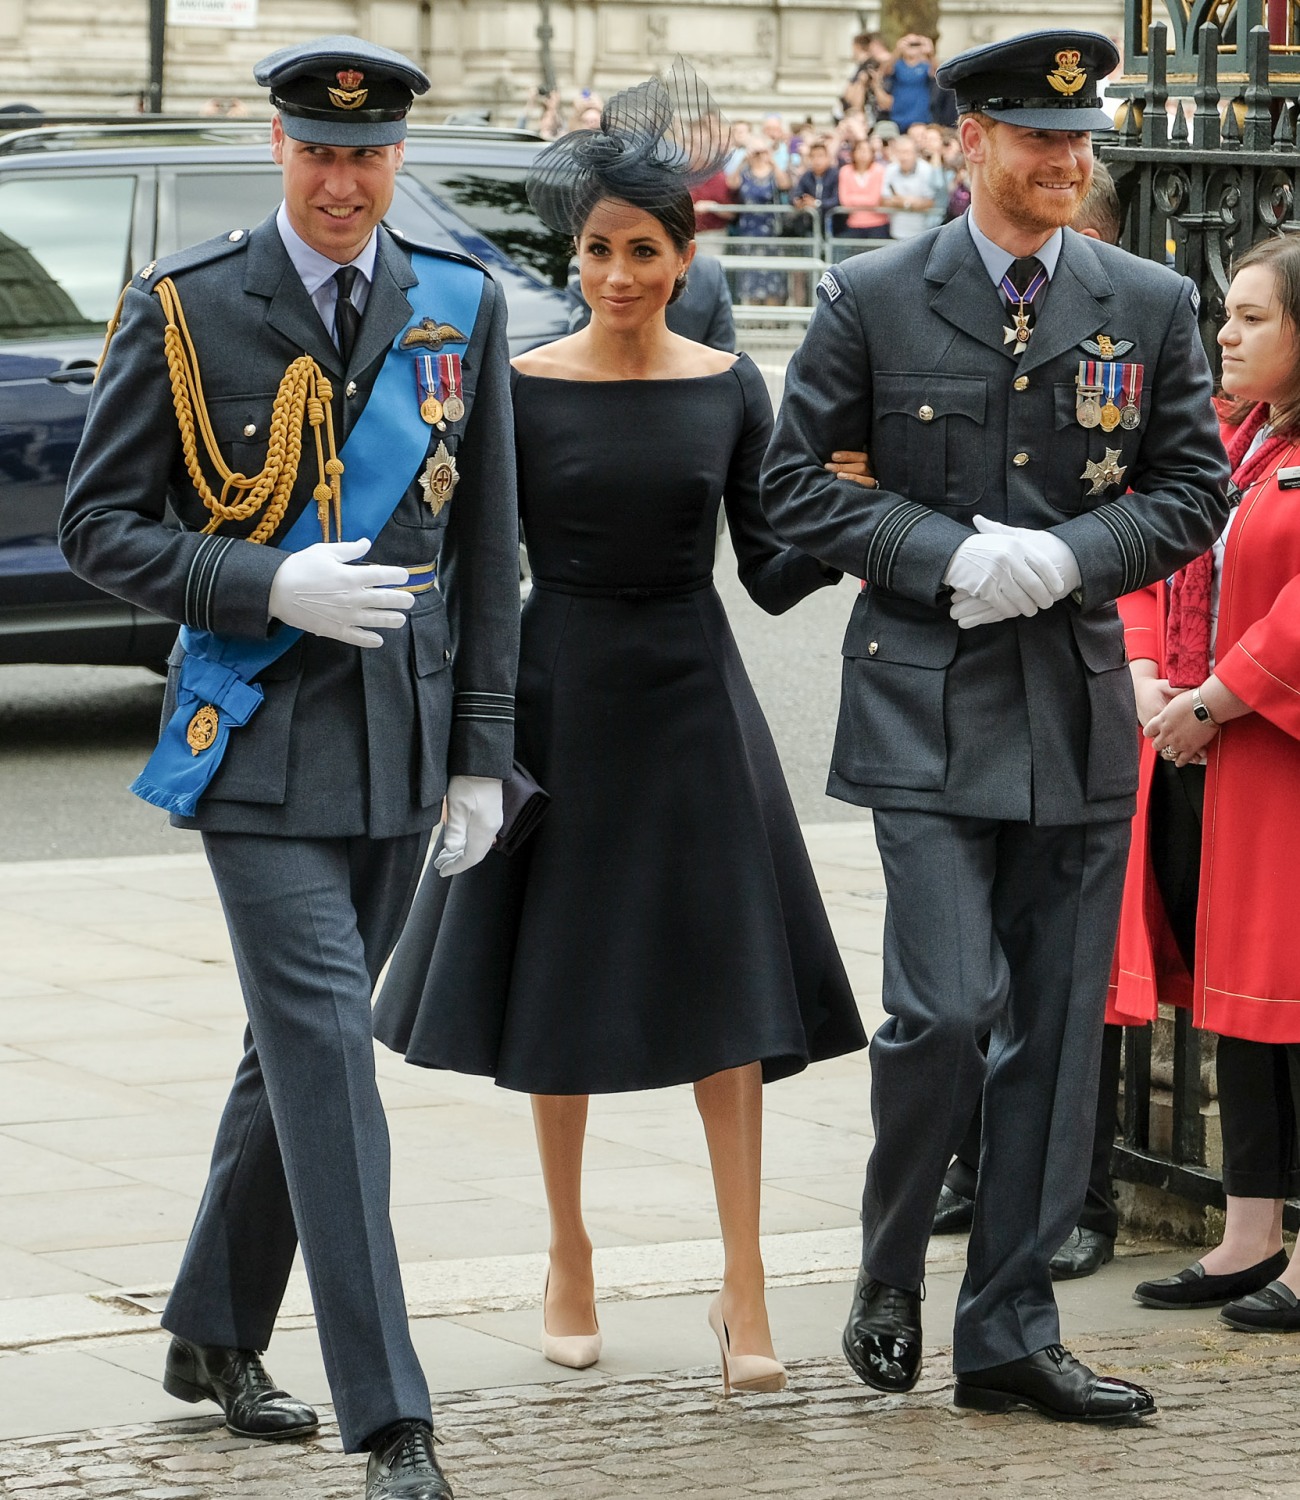 Kate, Duchess of Cambridge, Prince William, Duke of Cambridge, Prince Harry, The Duke of Sussex and  Meghan, Duchess of Sussex at service to mark the centenary of the Royal Air Force on 10/07/2018